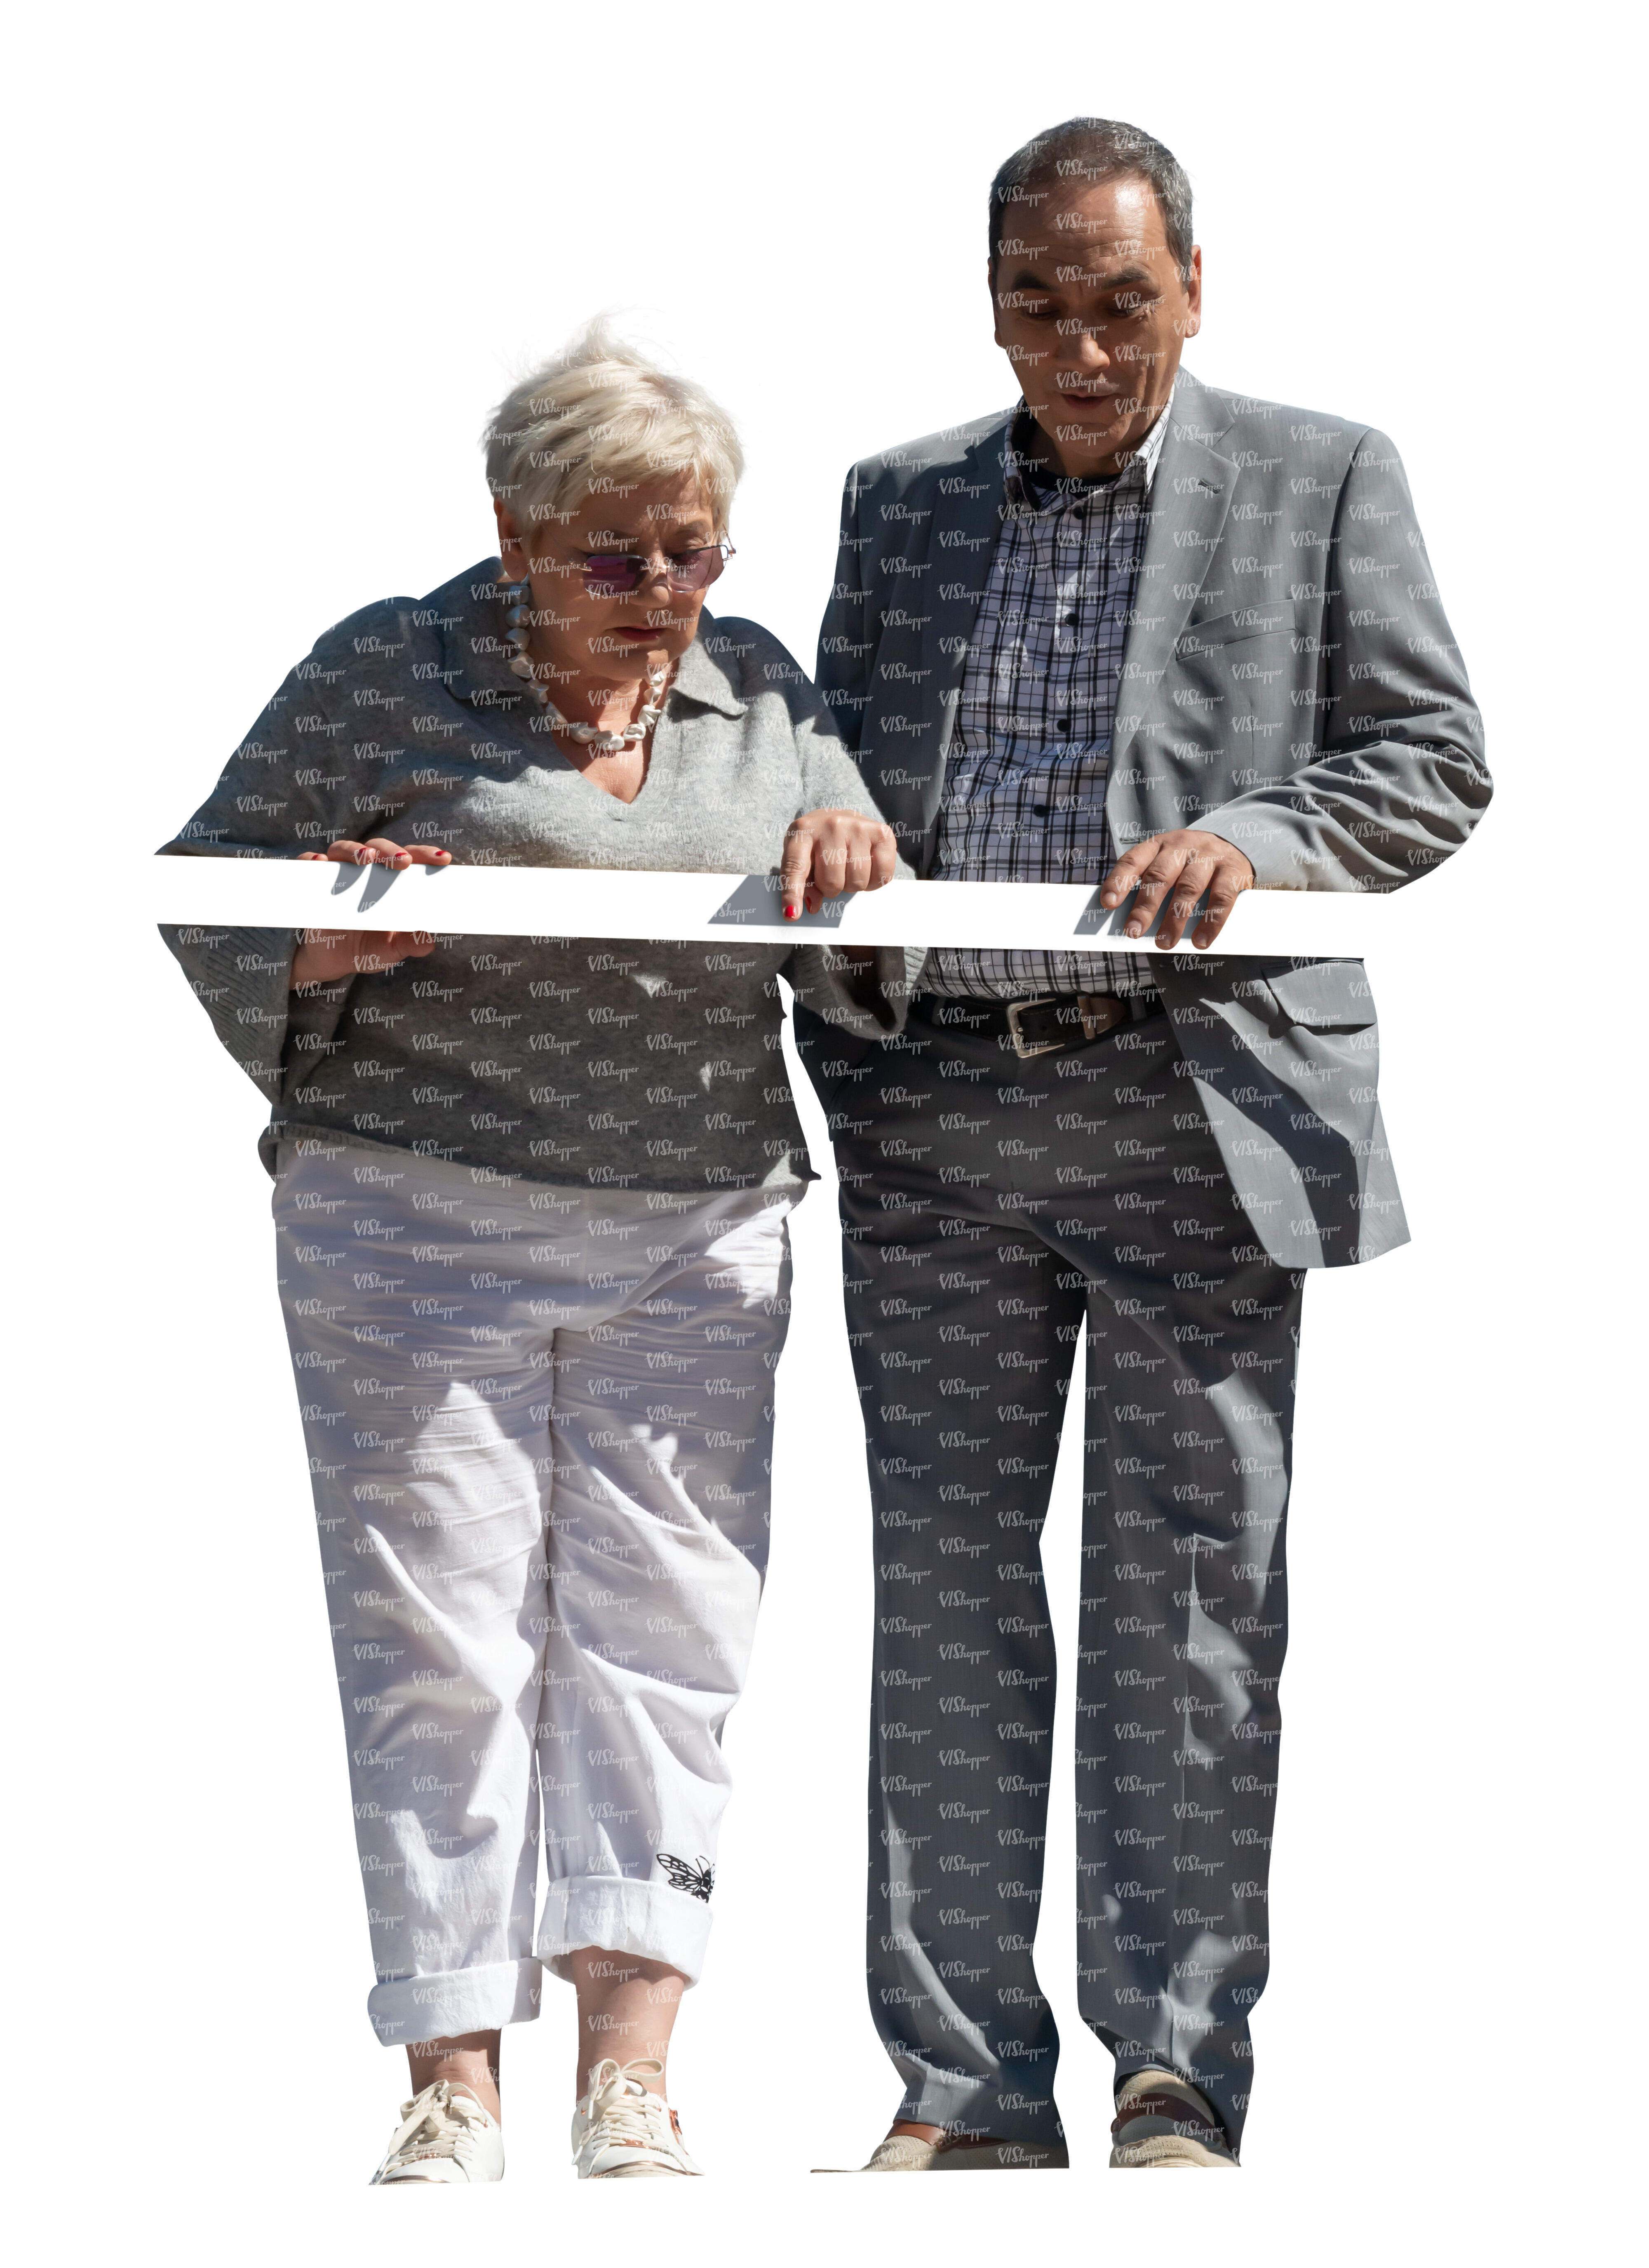 cut out two people standing on a balcony and lookinf down - VIShopper